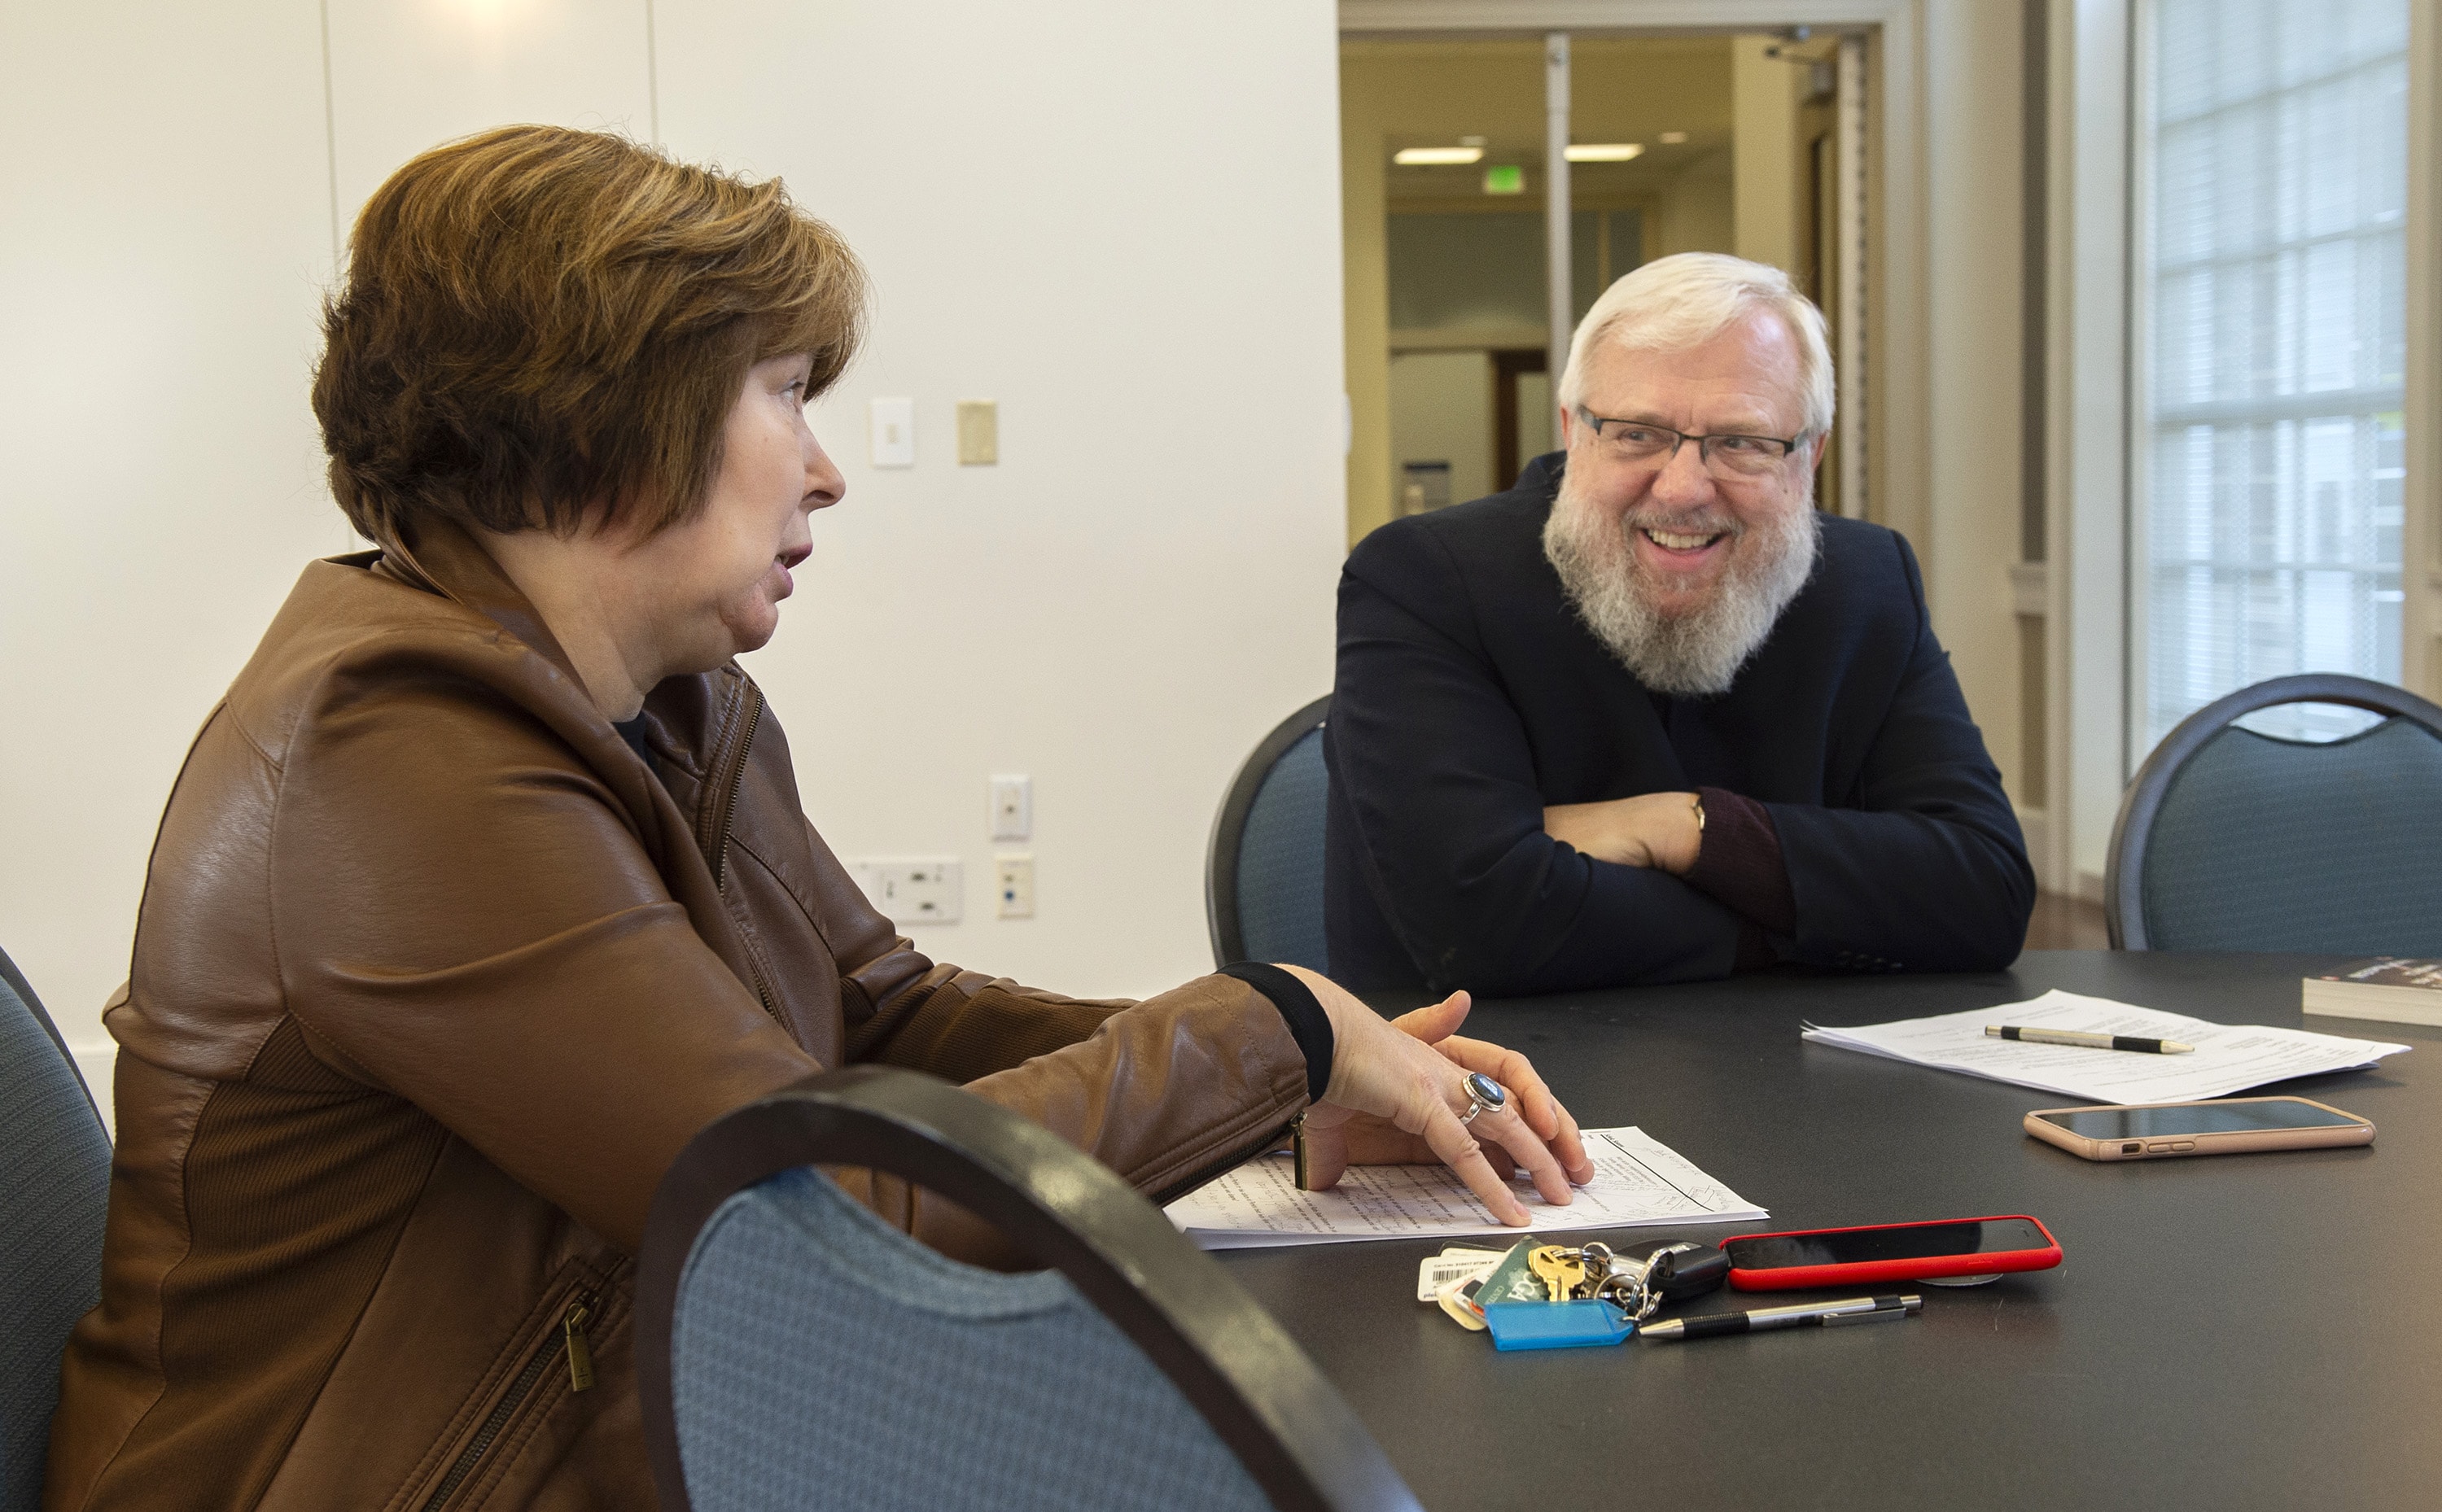 Susanne Scholz (left) and the Rev. Billy Abraham, both professors at Perkins School of Theology in Dallas, are ideological adversaries and unlikely friends. Photo by Hillsman Stuart Jackson, © Southern Methodist University.